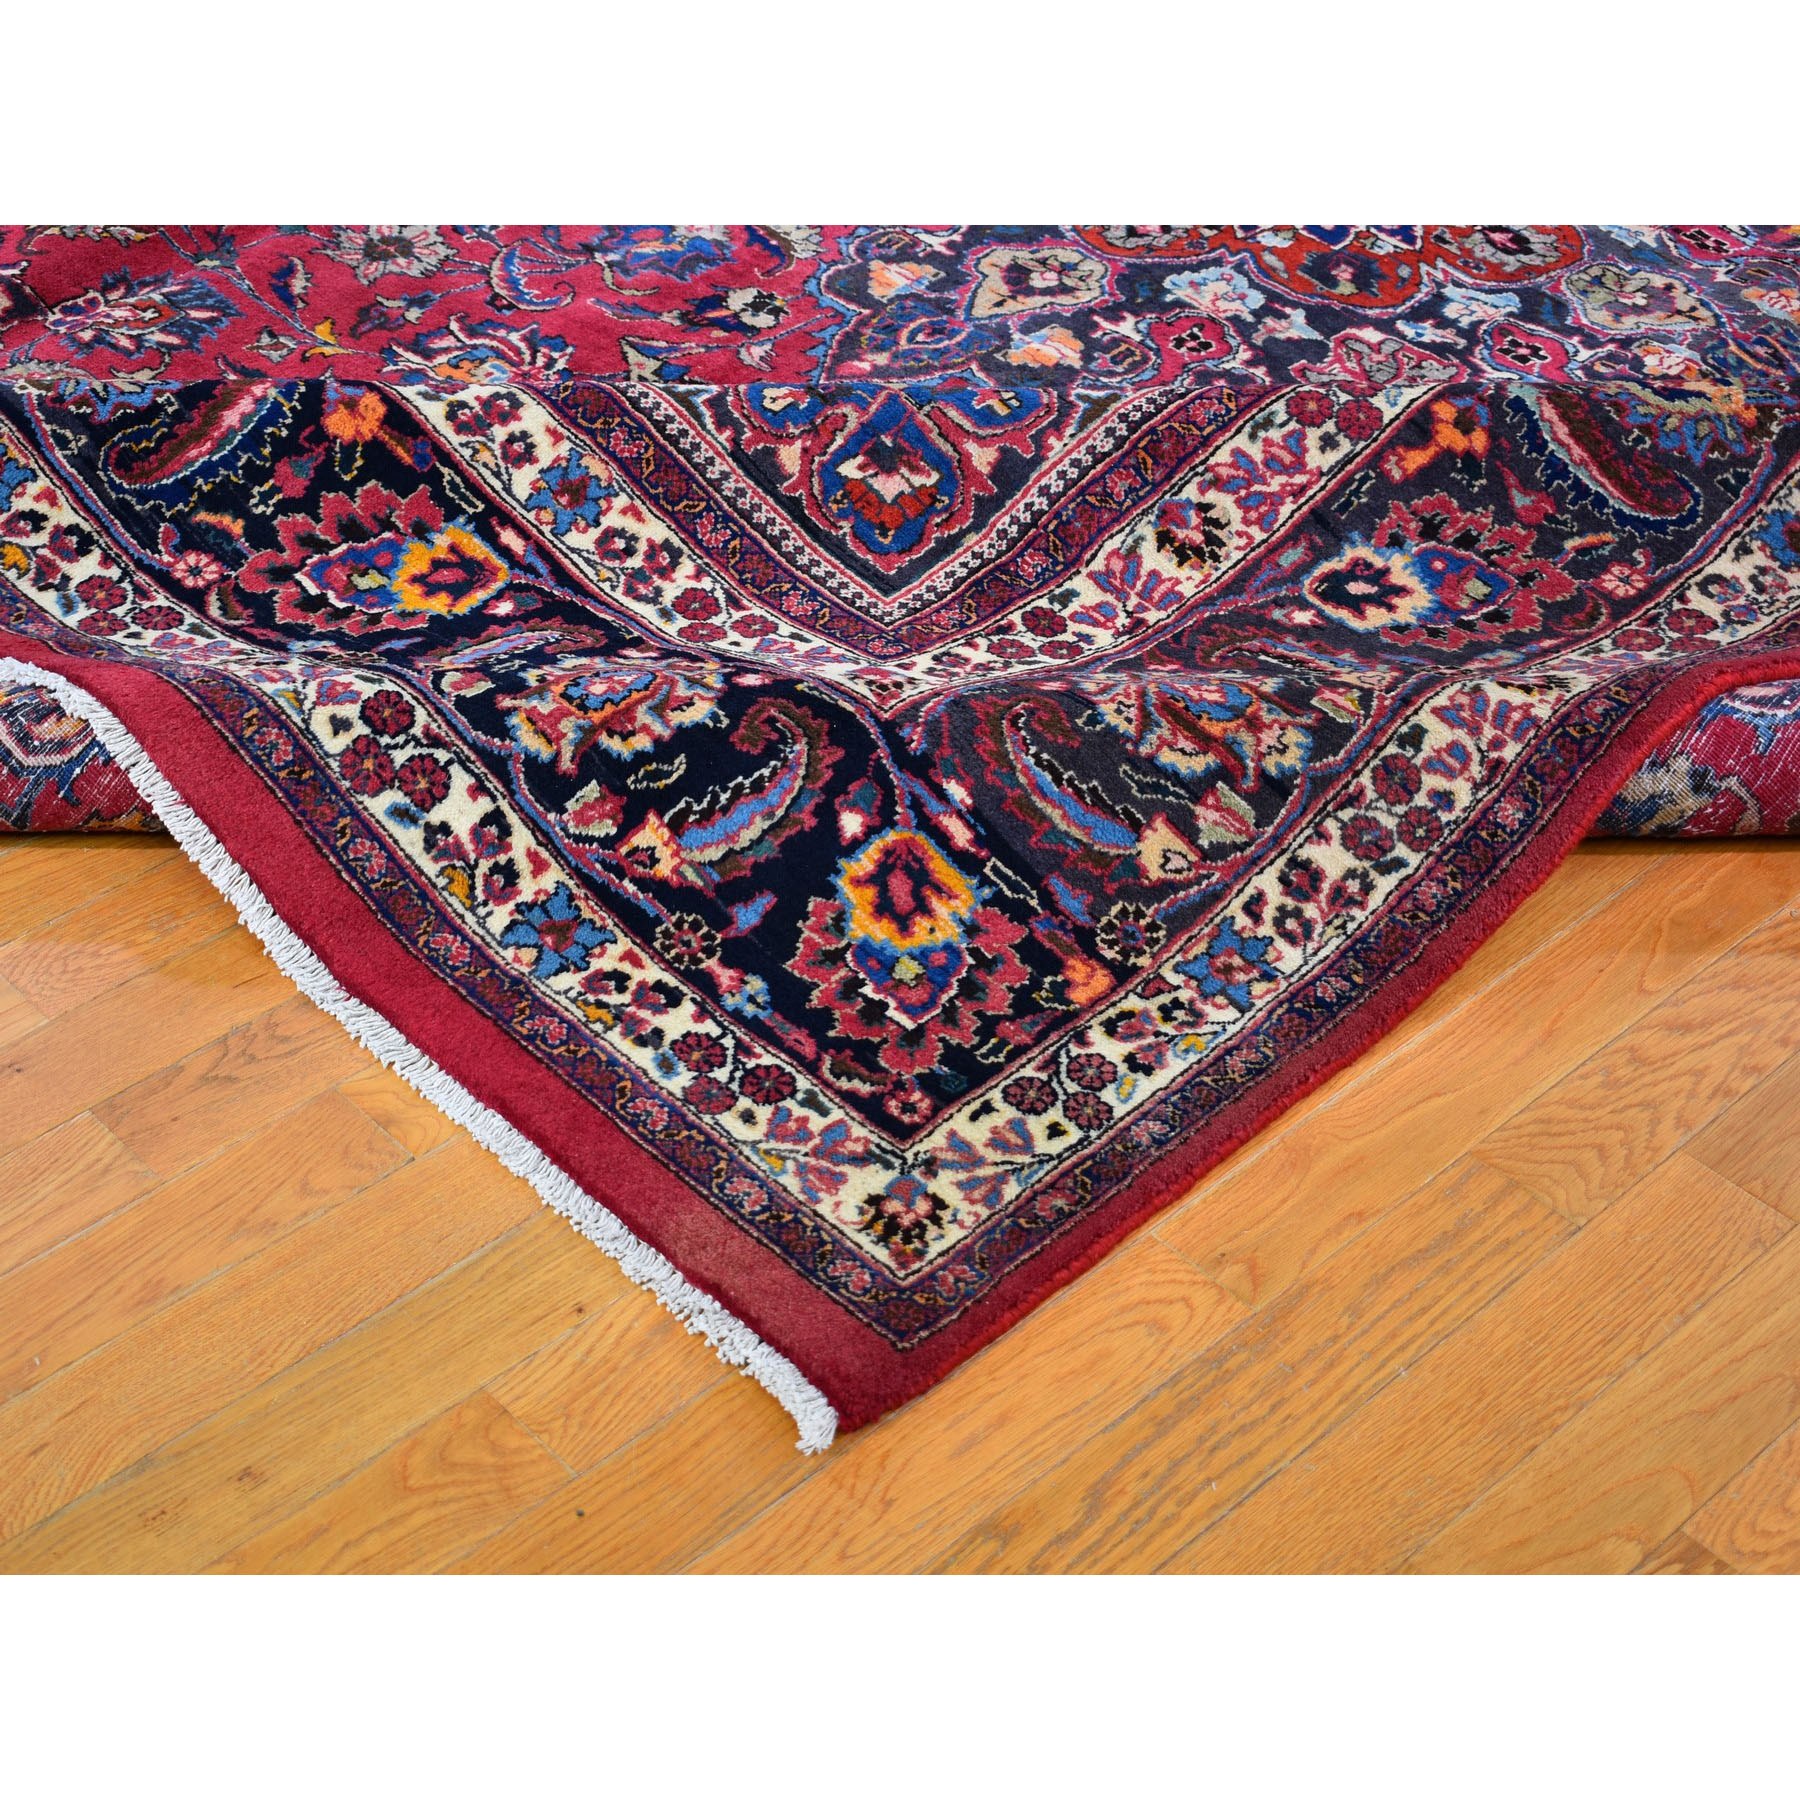 10-x13- Red Vintage Persian Mashad Clean Exc Cond Hand Knotted Oriental Rug 